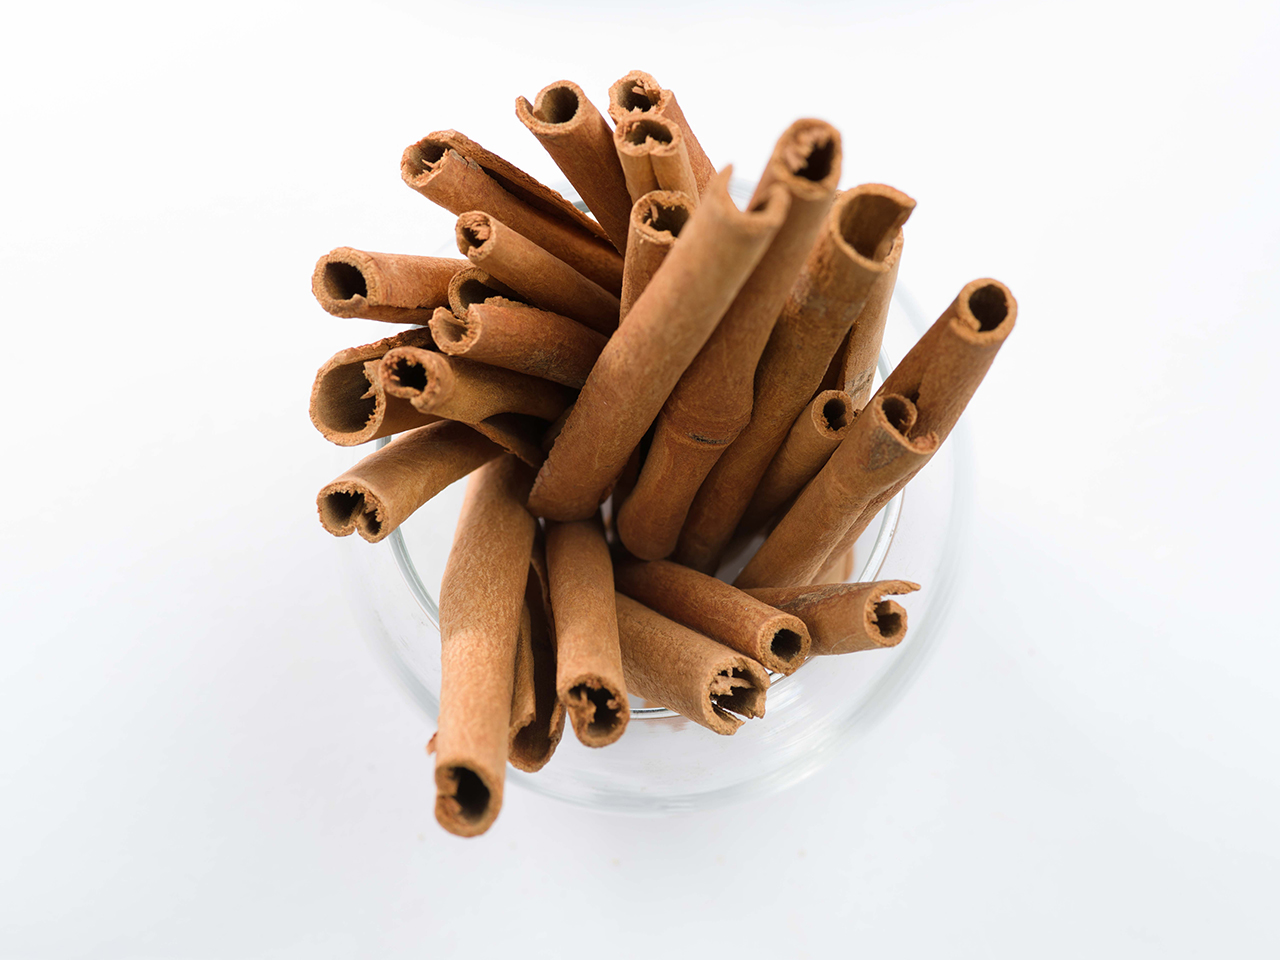 Cinnamon Extract is obtained by the extraction of dried barks of cinnamon